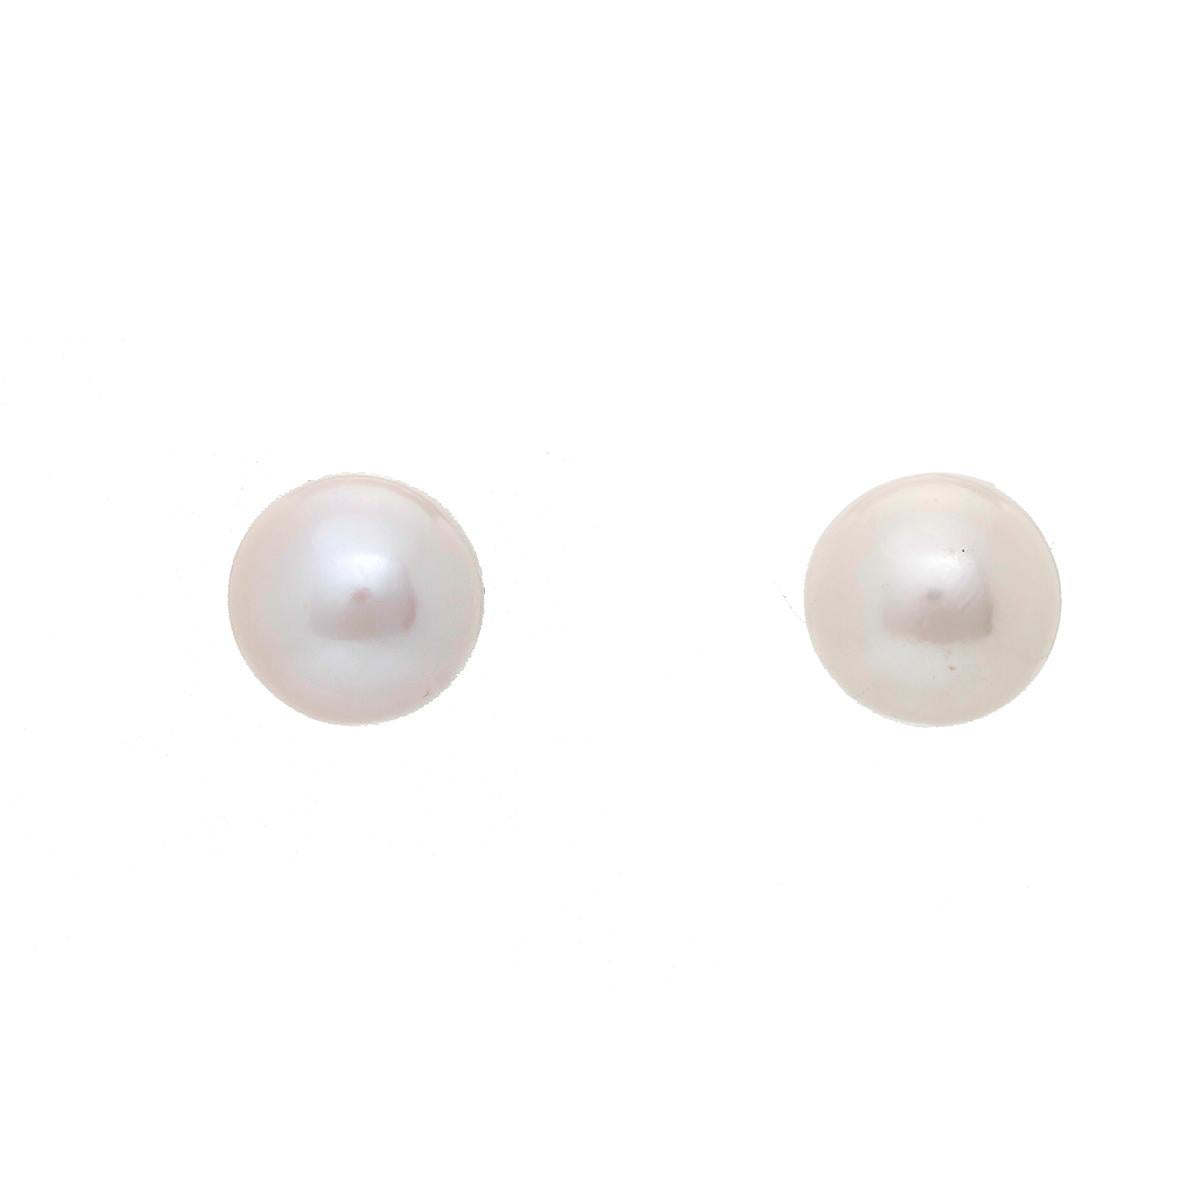 Freshwater Pearl Studs In Excellent Condition For Sale In Dallas, TX